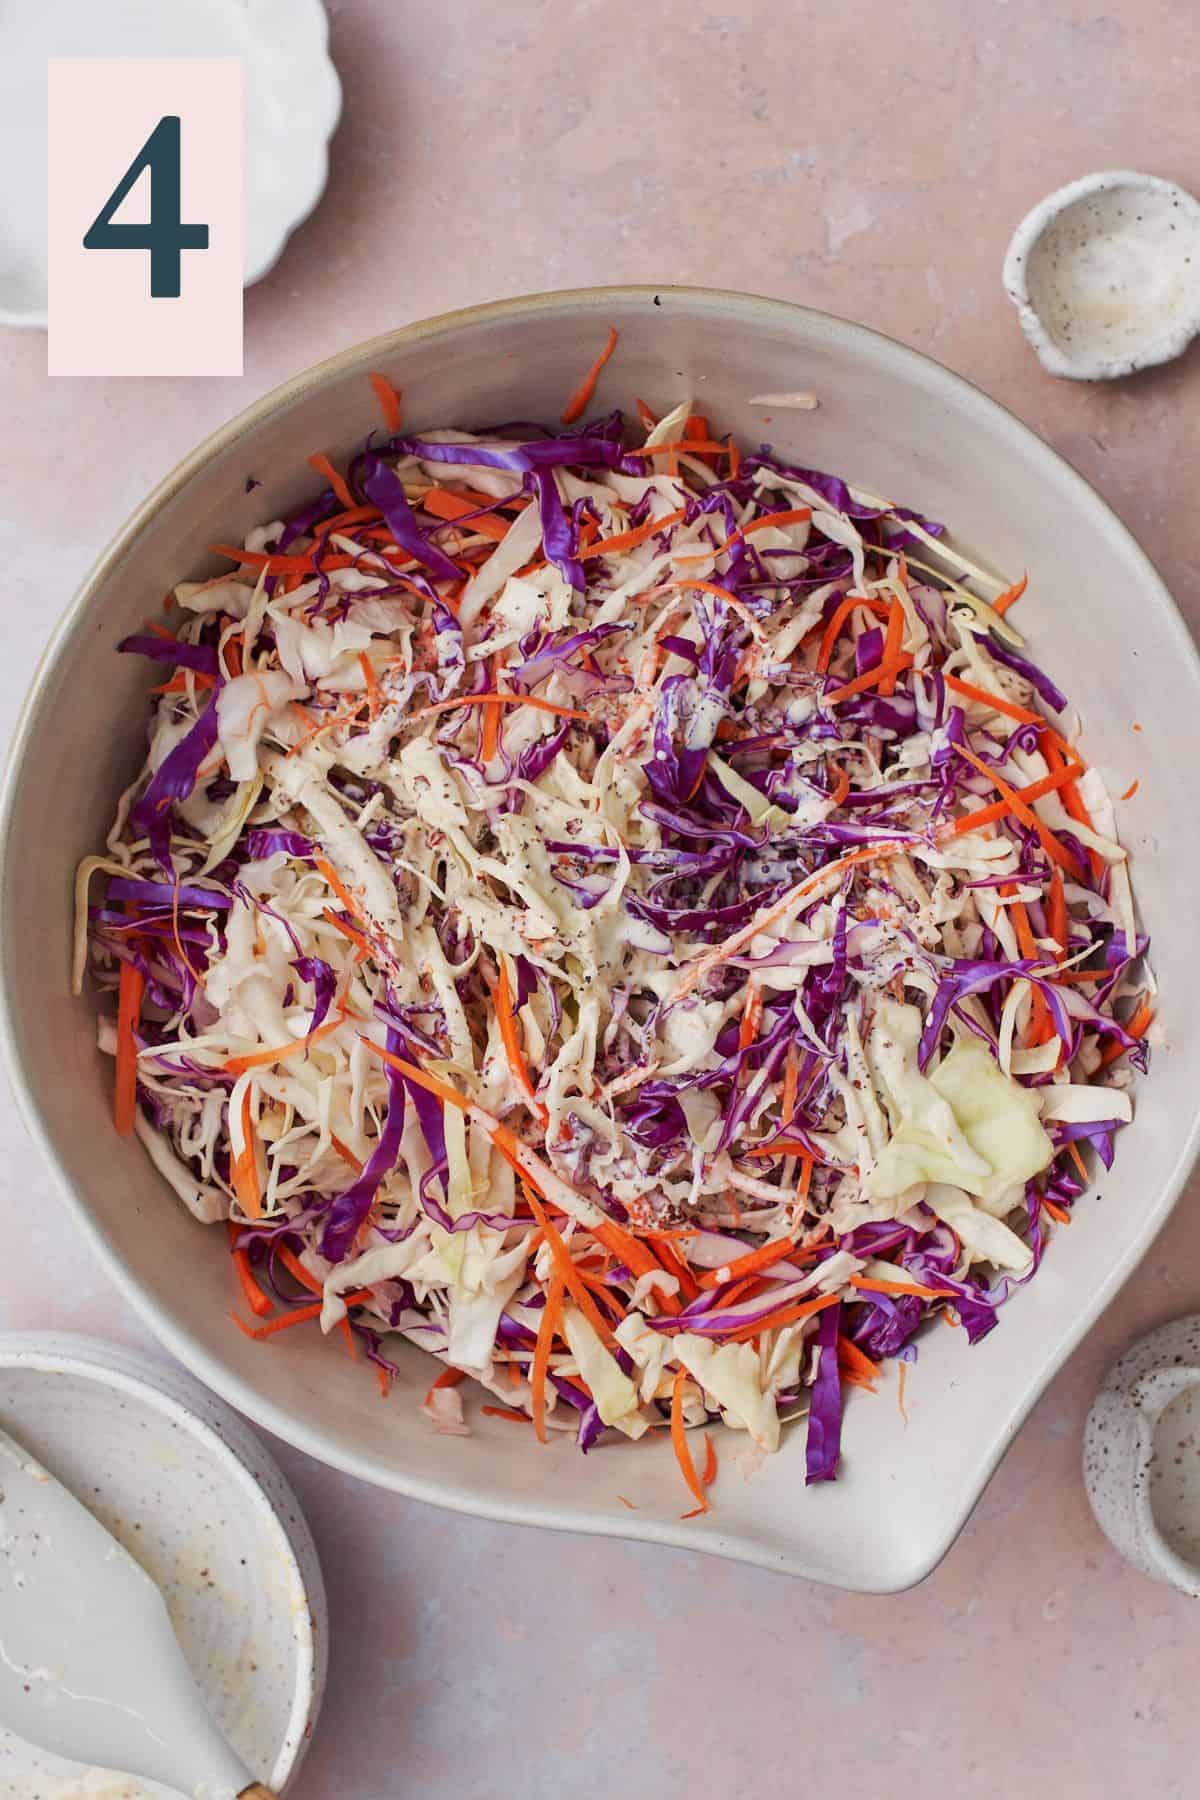 Shredded cabbage topped with dijon, mayonnaise, and yogurt sauce.